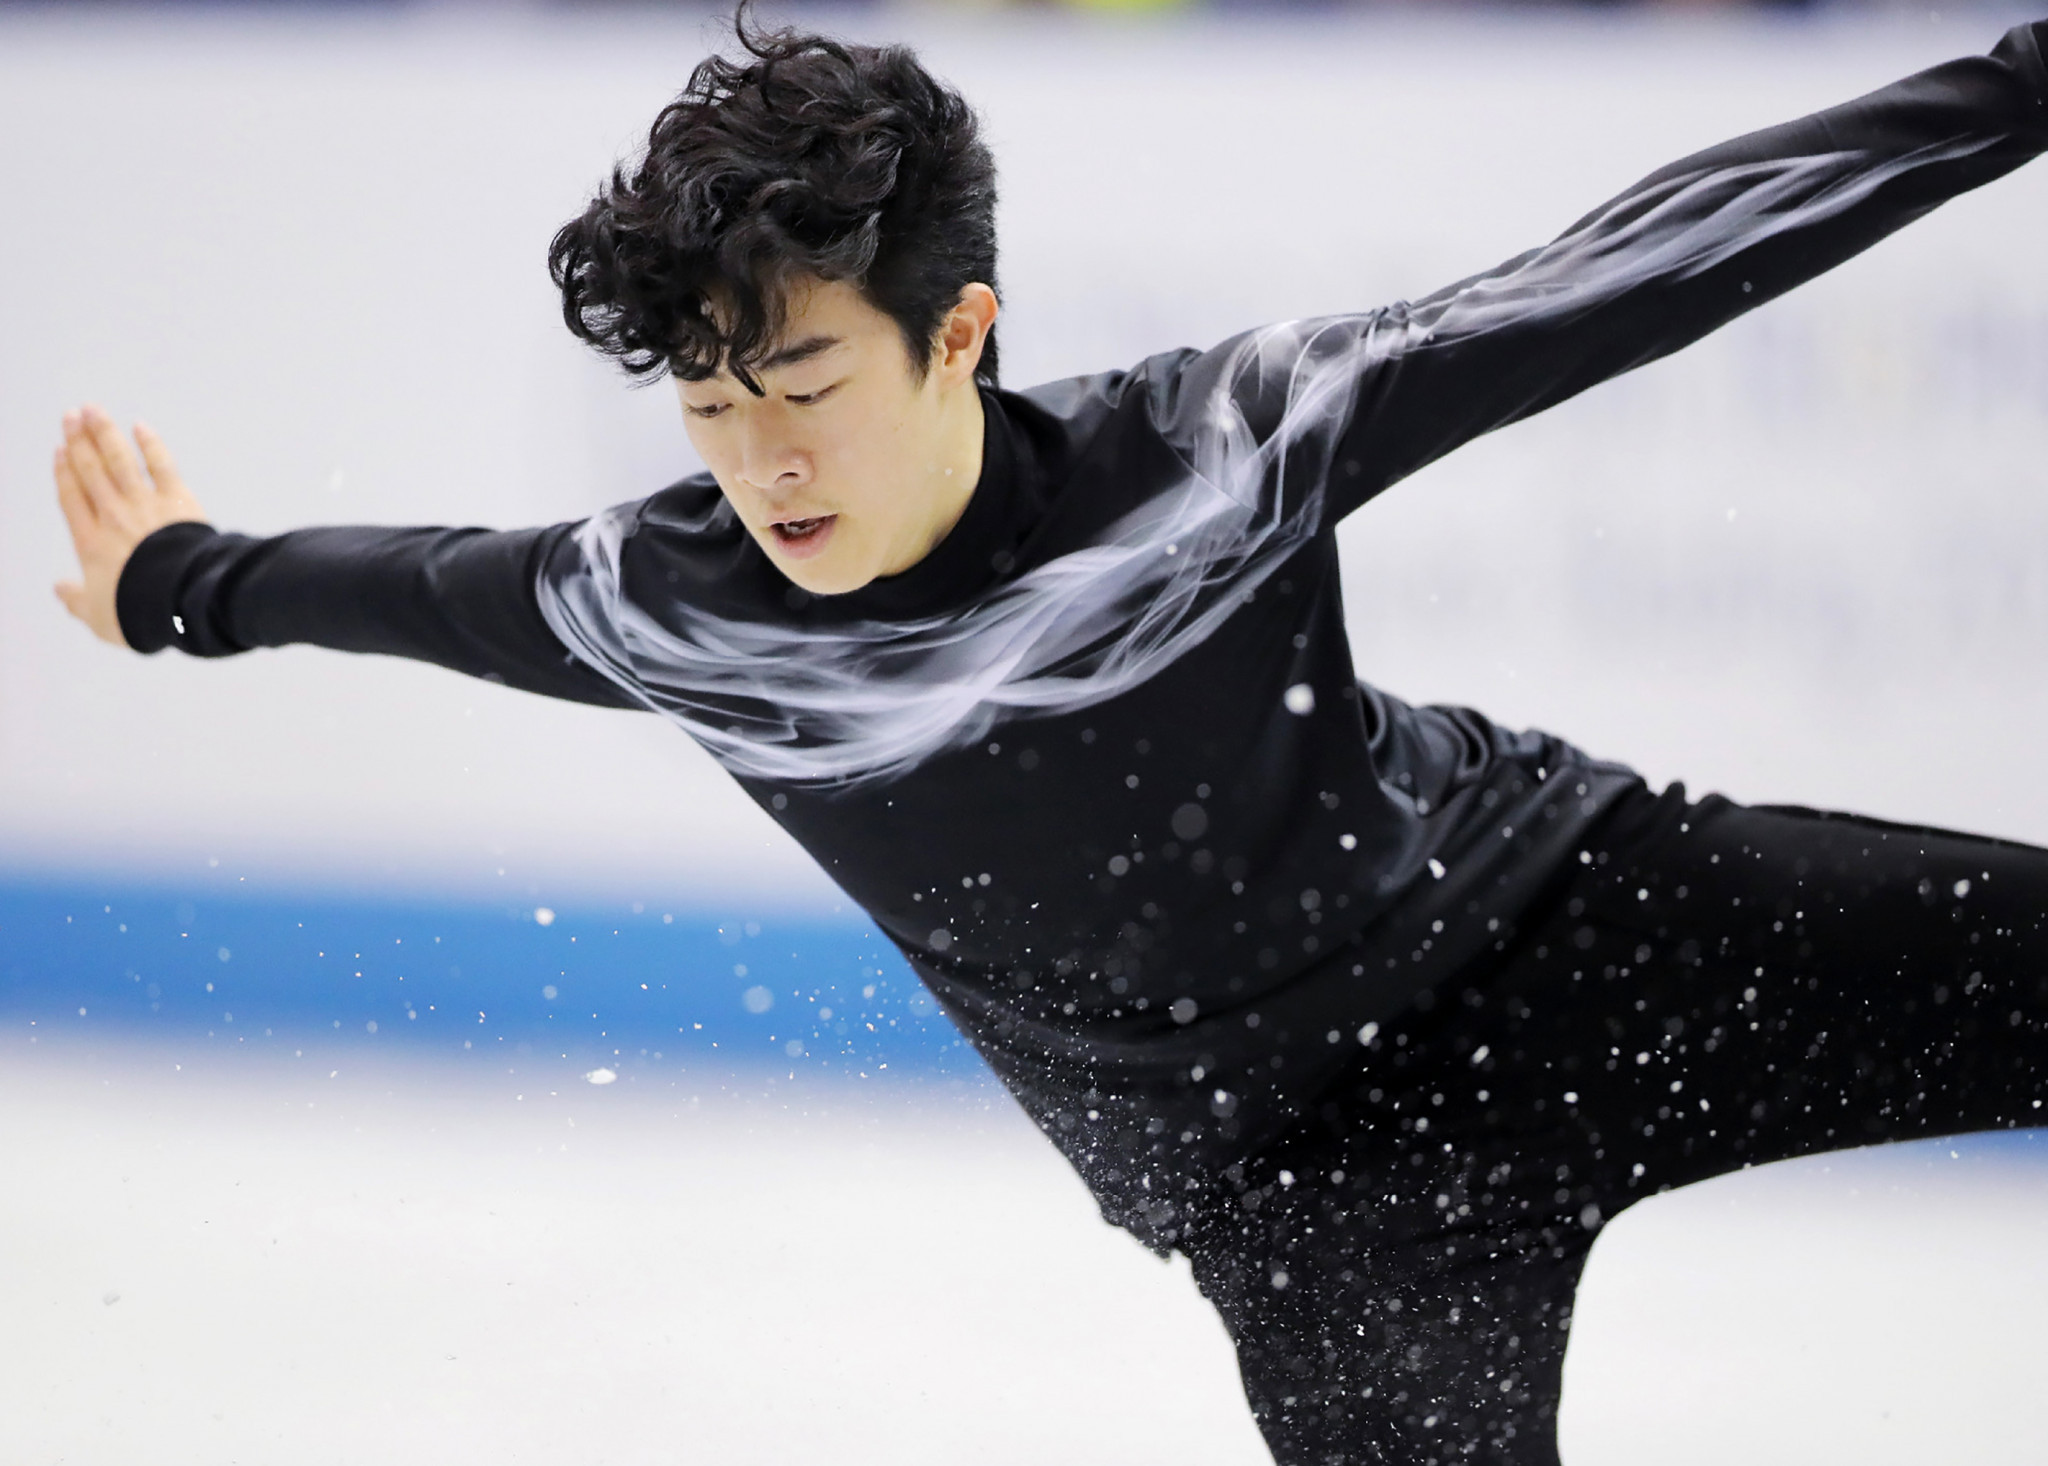 World champion Nathan Chen will lead the men's challenge for the United States at next month's Skate America event ©Getty Images